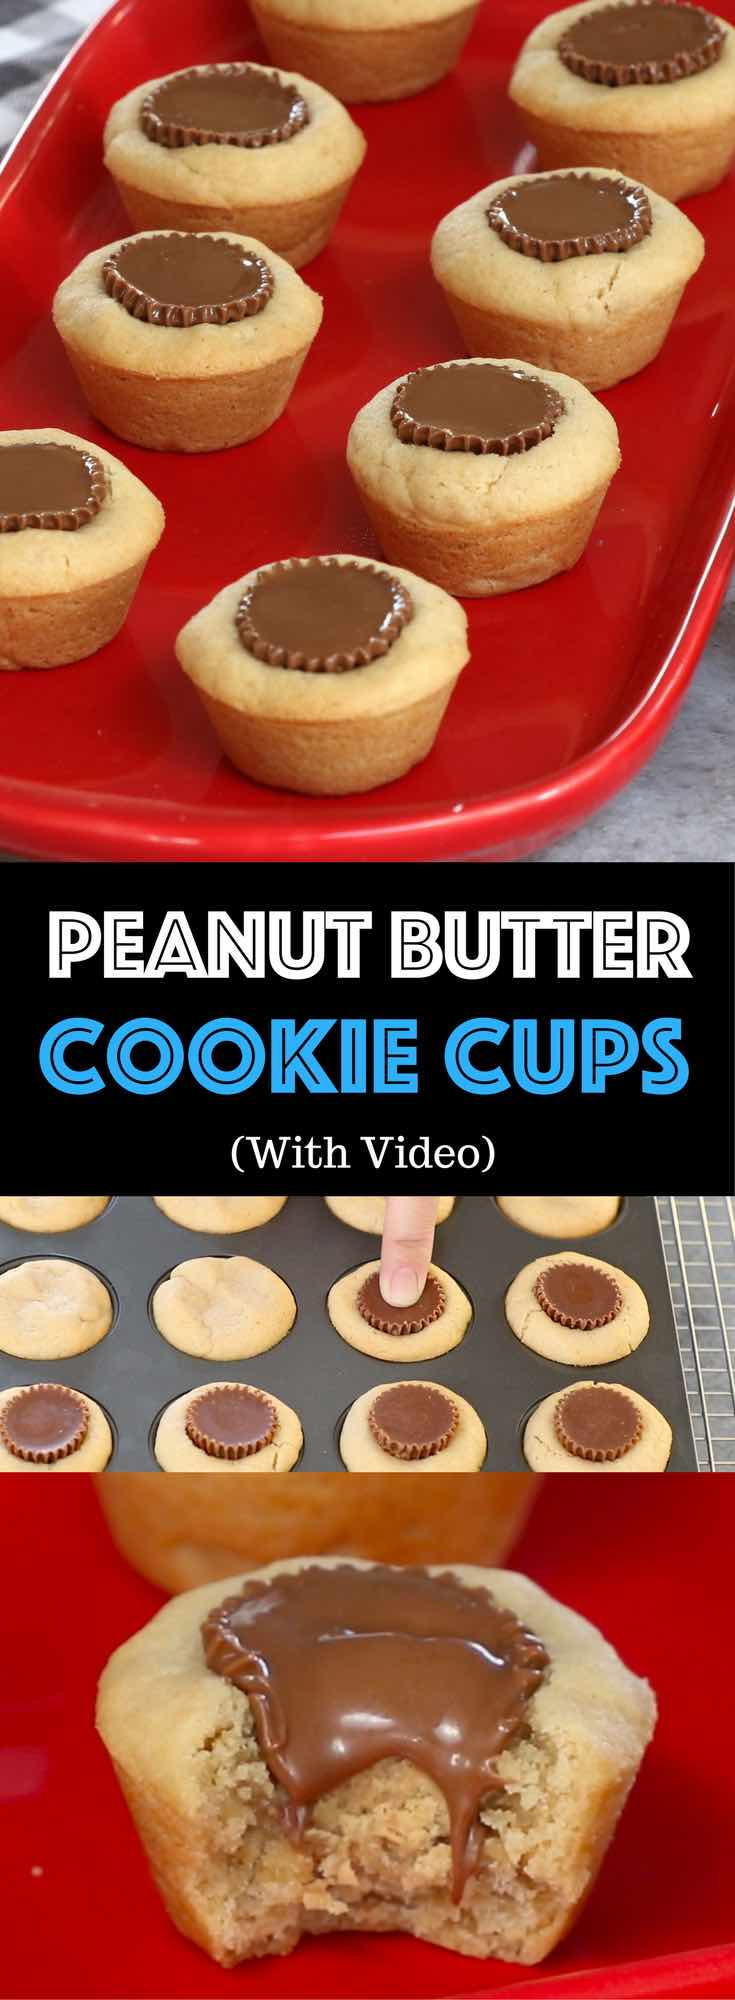 Reese Peanut Butter Cup Cookies Recipe
 Reese s Peanut Butter Cup Cookies Recipe with Video